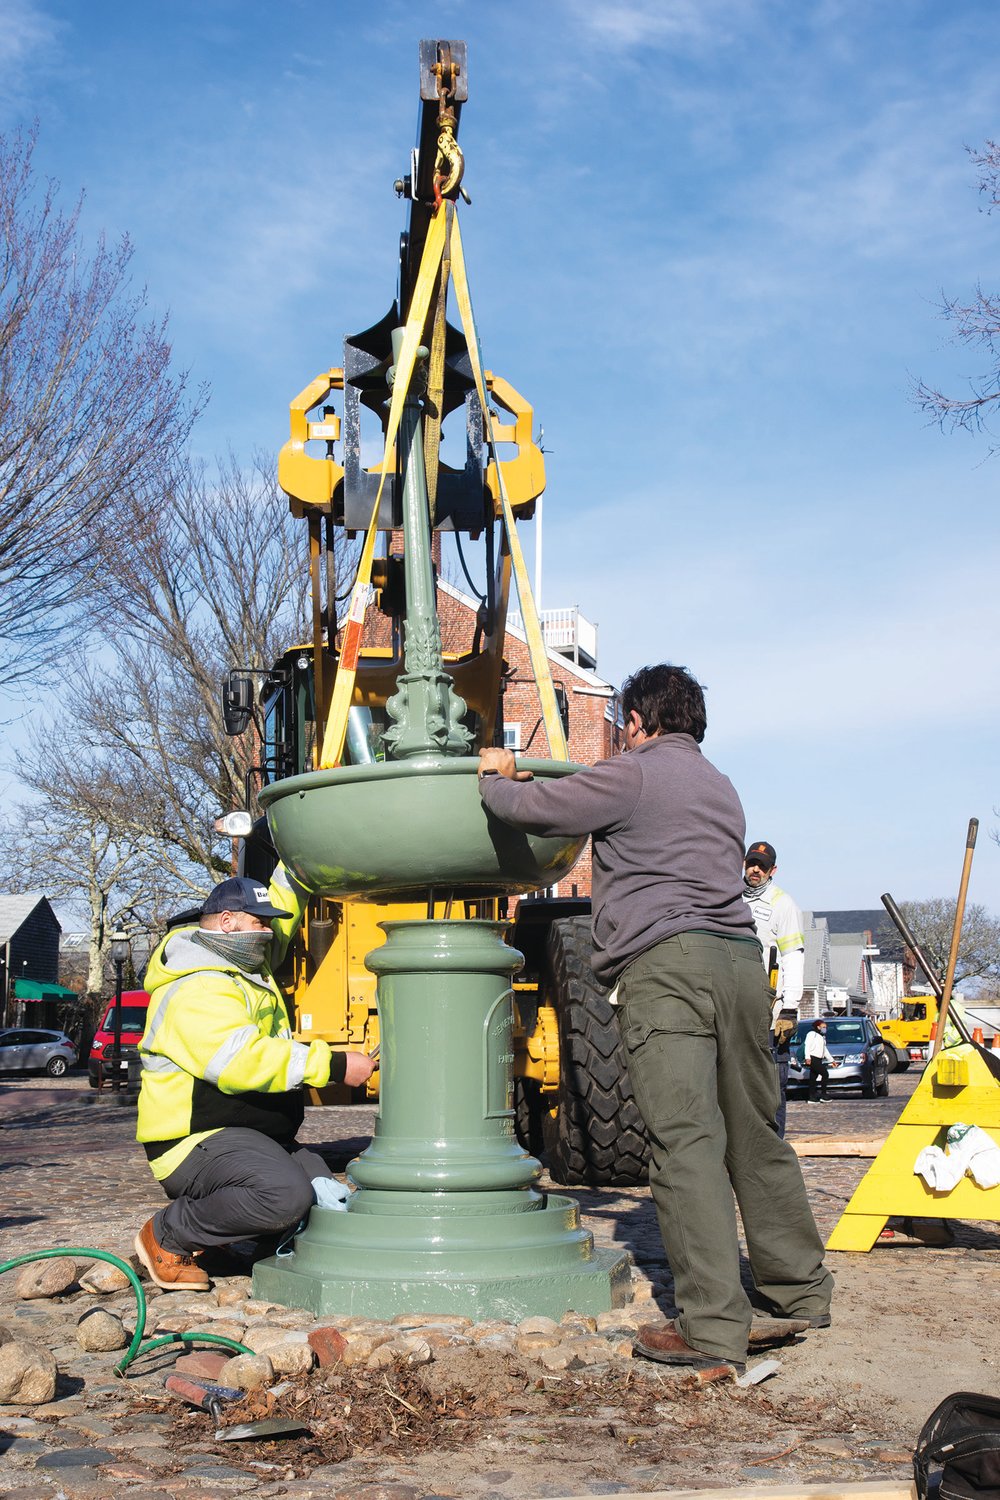 The Max T. Wagner horse fountain returned to its rightful place at the foot of Main Street last Thursday, a little over a year after a driver smashed into it, knocking it down, claiming he was blinded by the sun and didn’t see it.